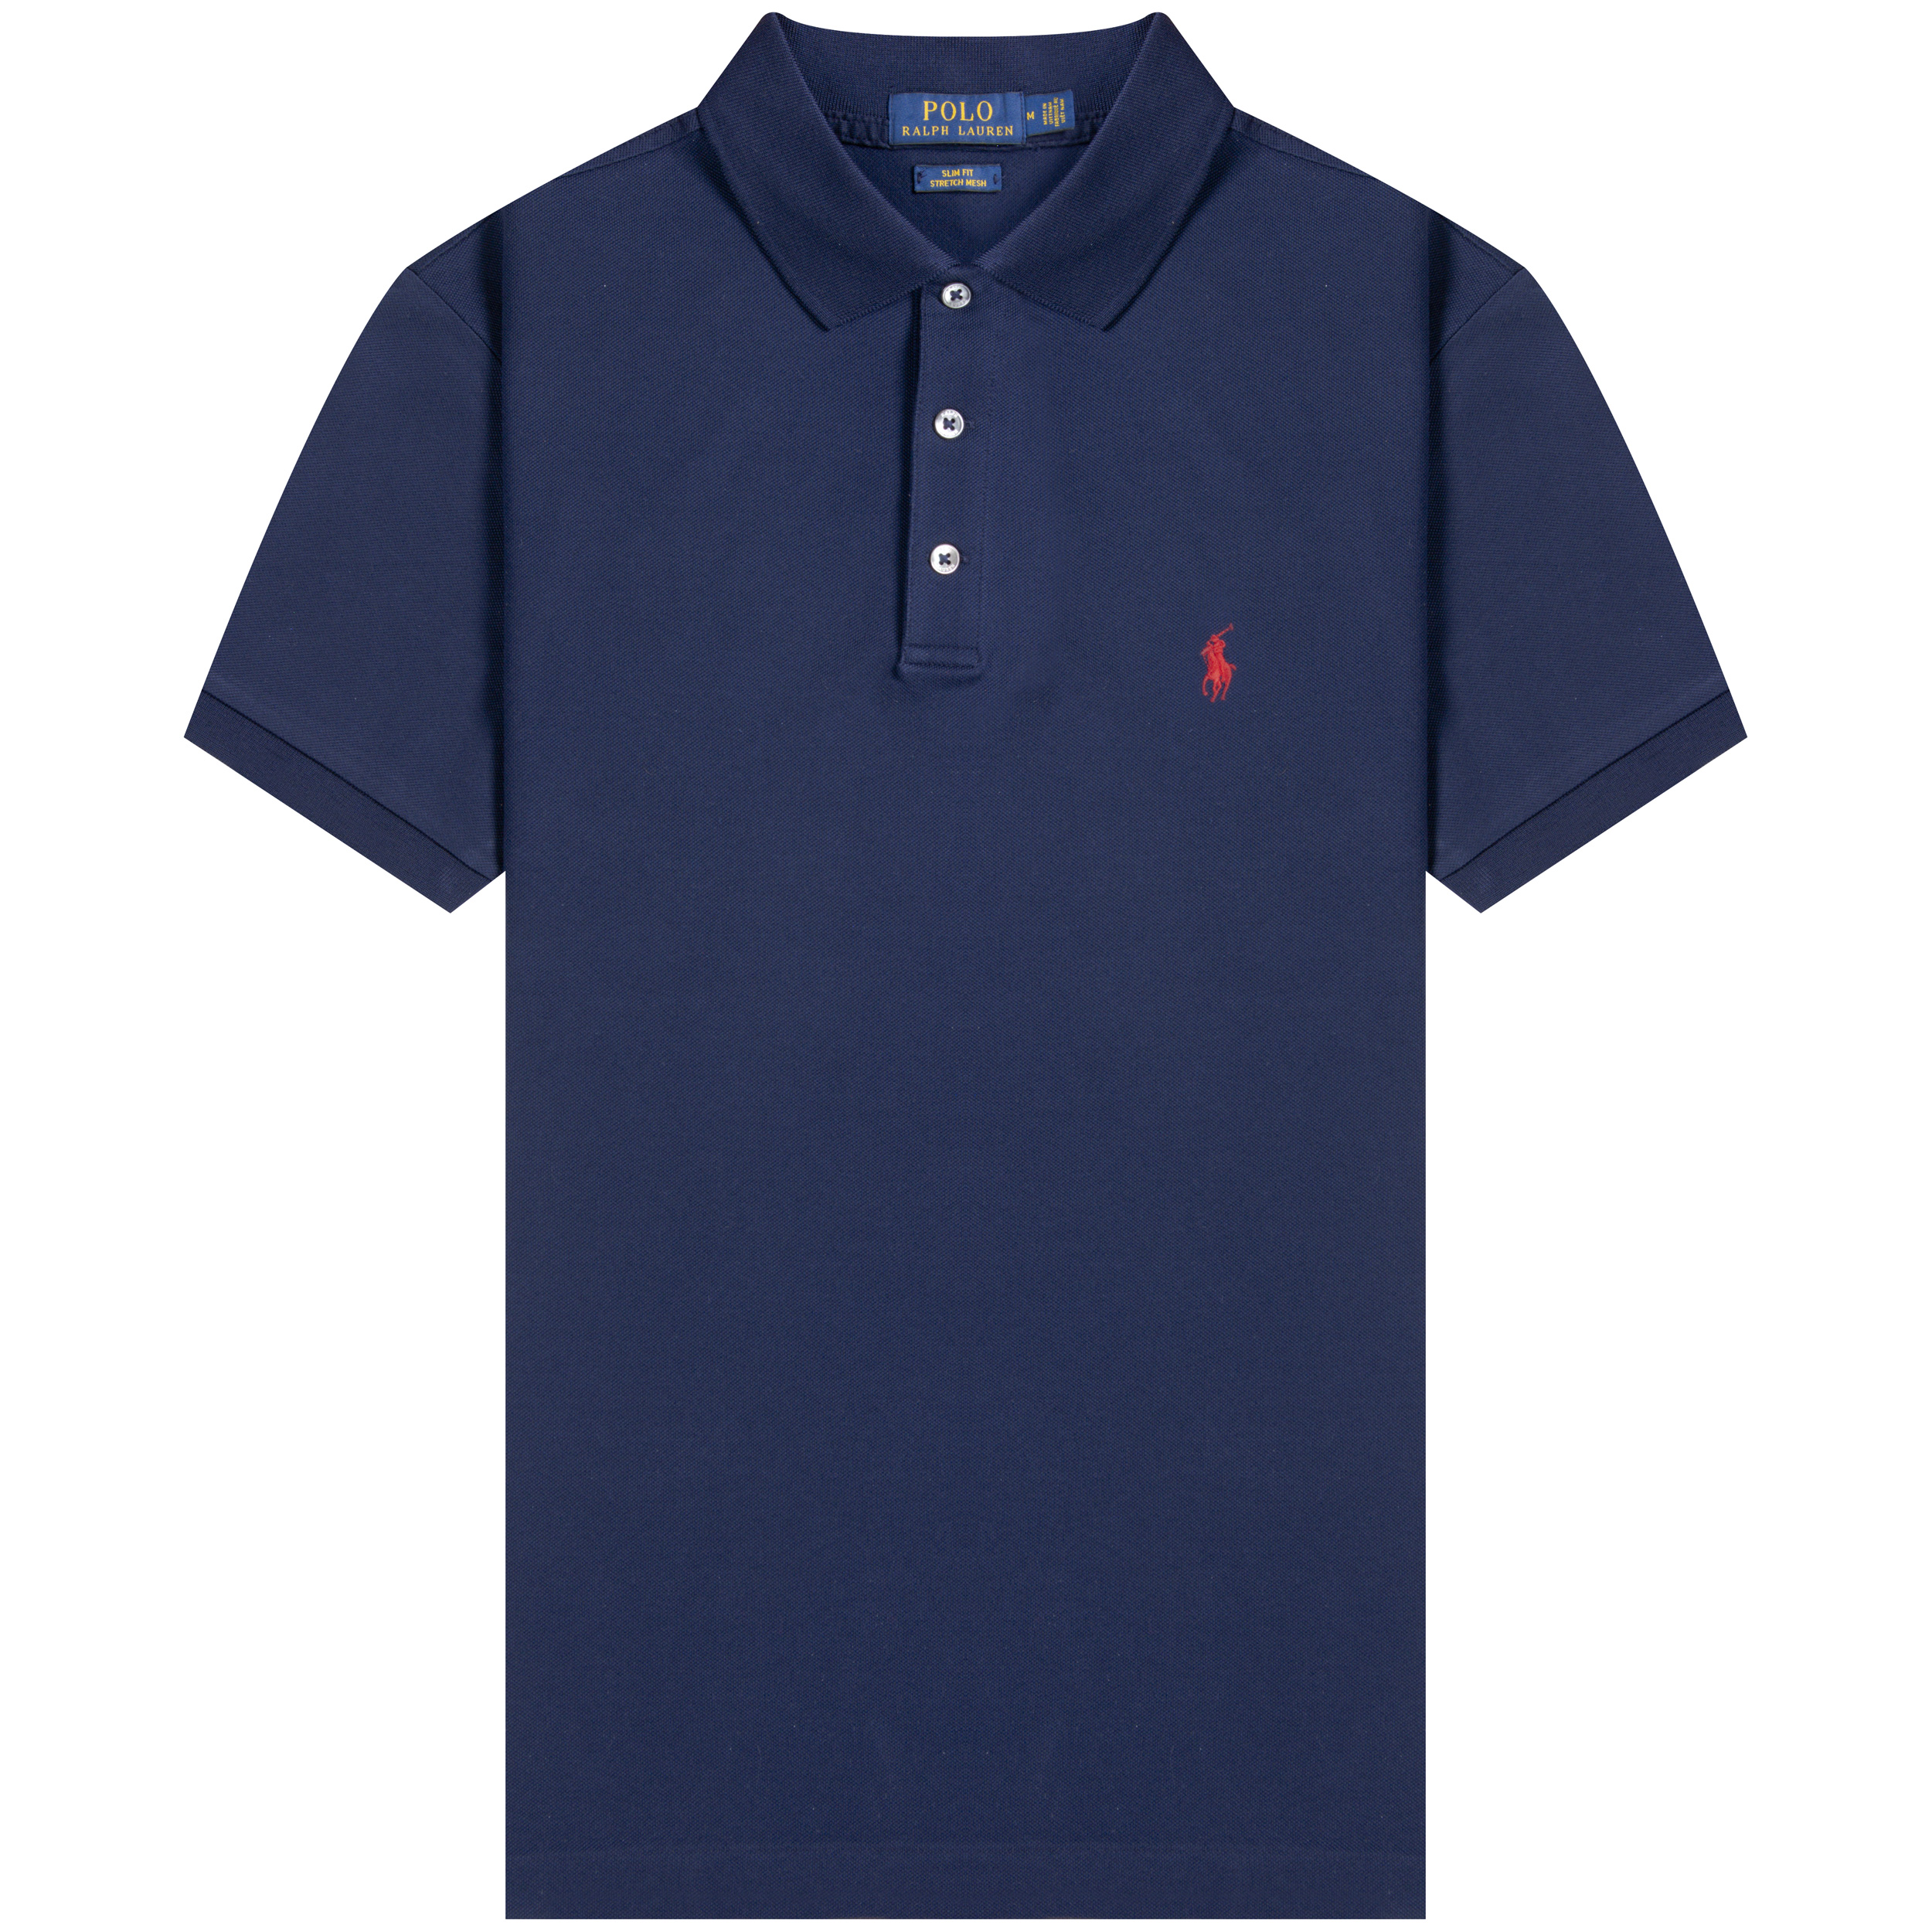 Polo Ralph Lauren ’Stretch Mesh’ Slim Fit Polo French Navy